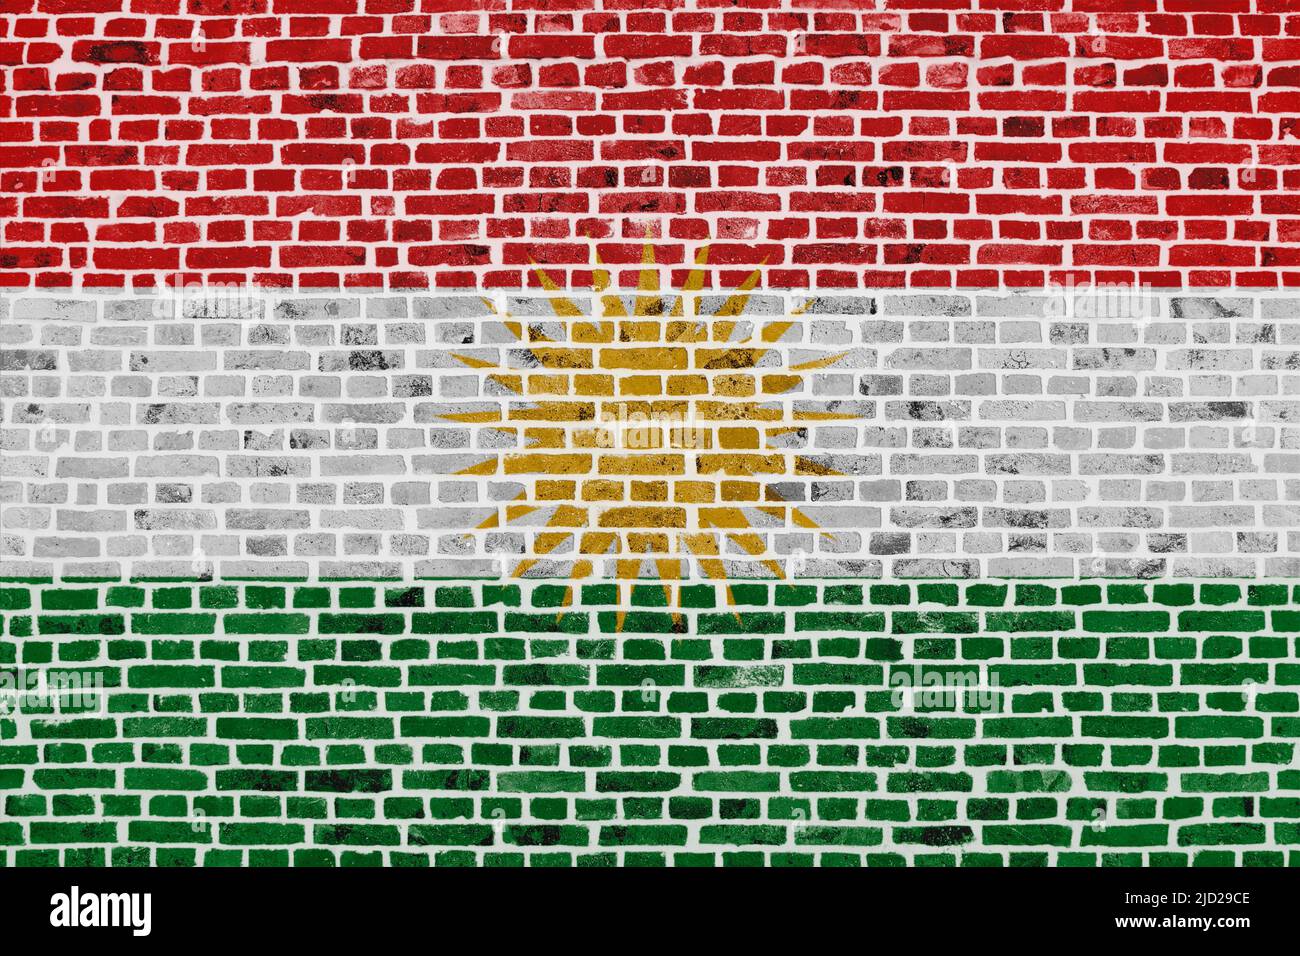 Close-up on a brick wall with the flag of Kurdistan painted on it. Stock Photo